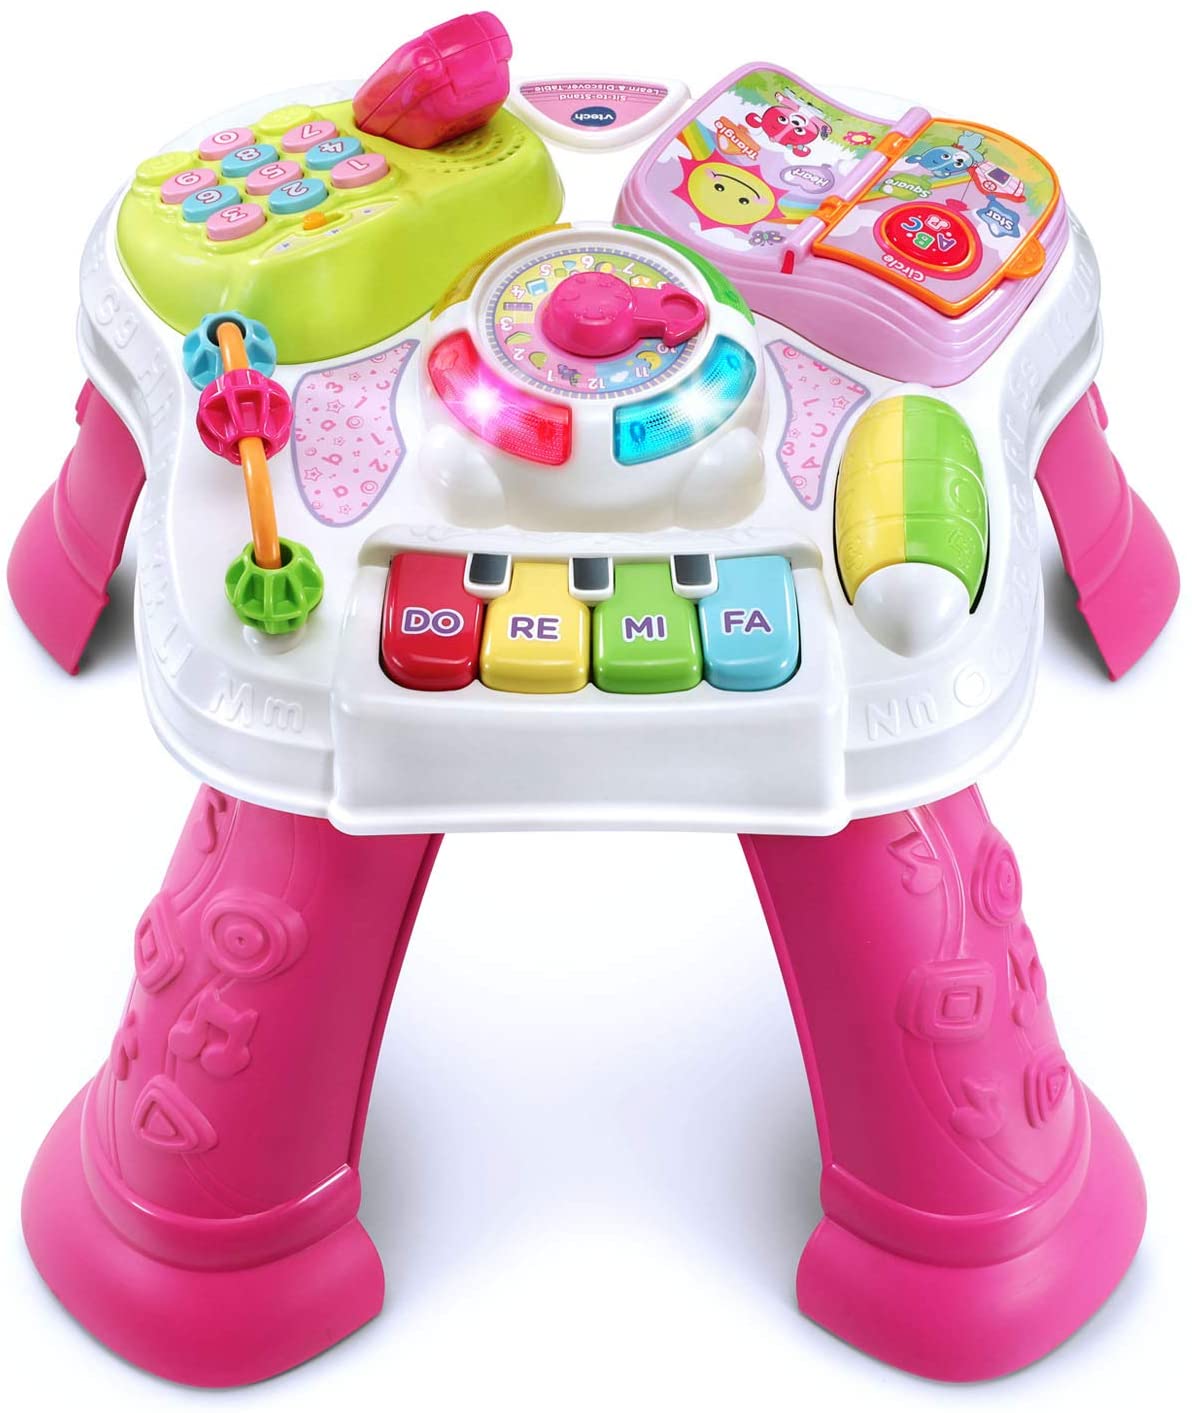 VTech Interactive Sound Table, Sit-To-Stand